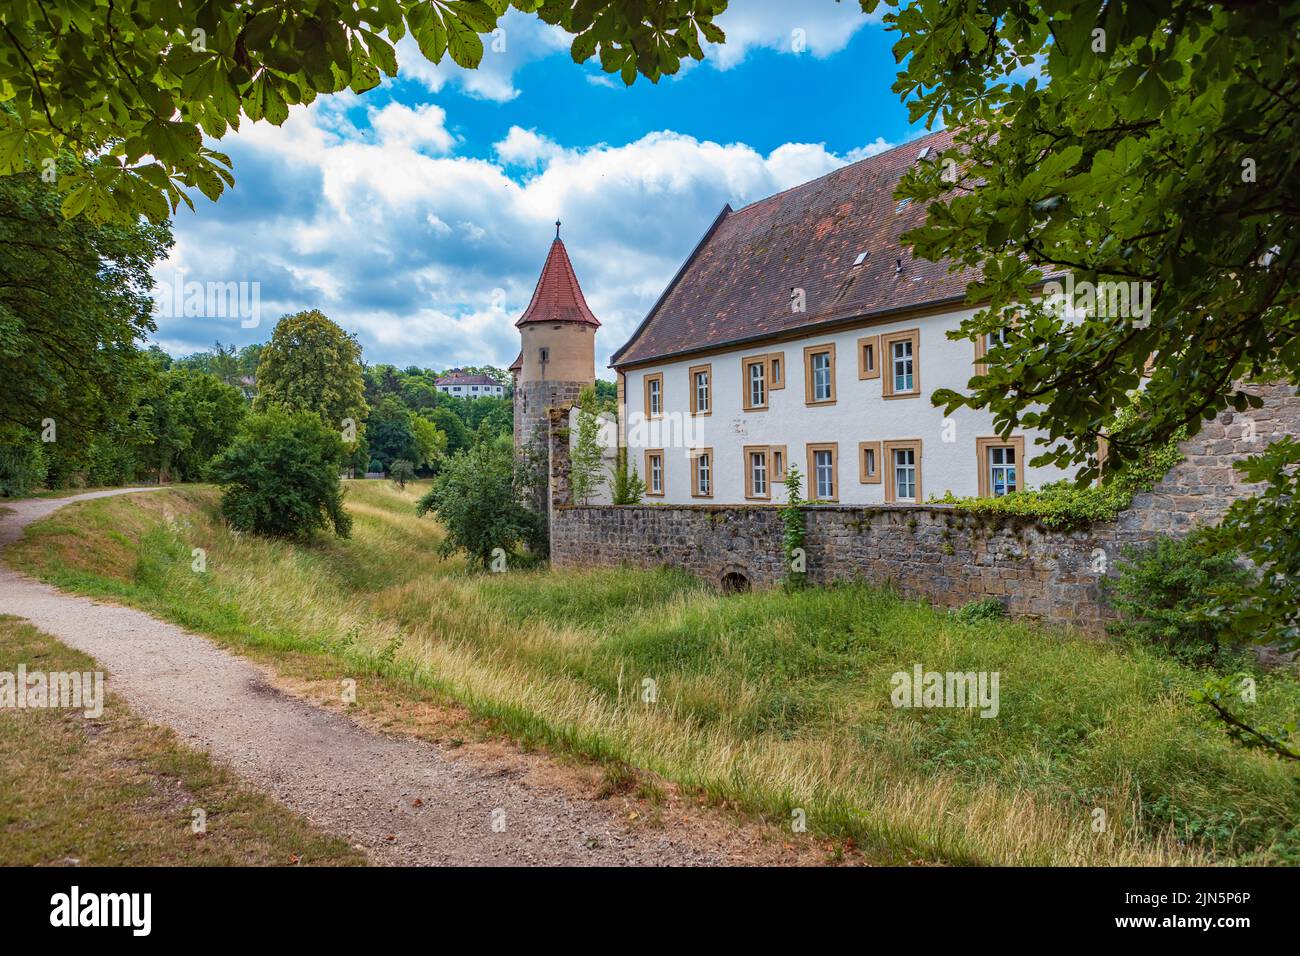 The townwall of Sesslach, Germany. Stock Photo